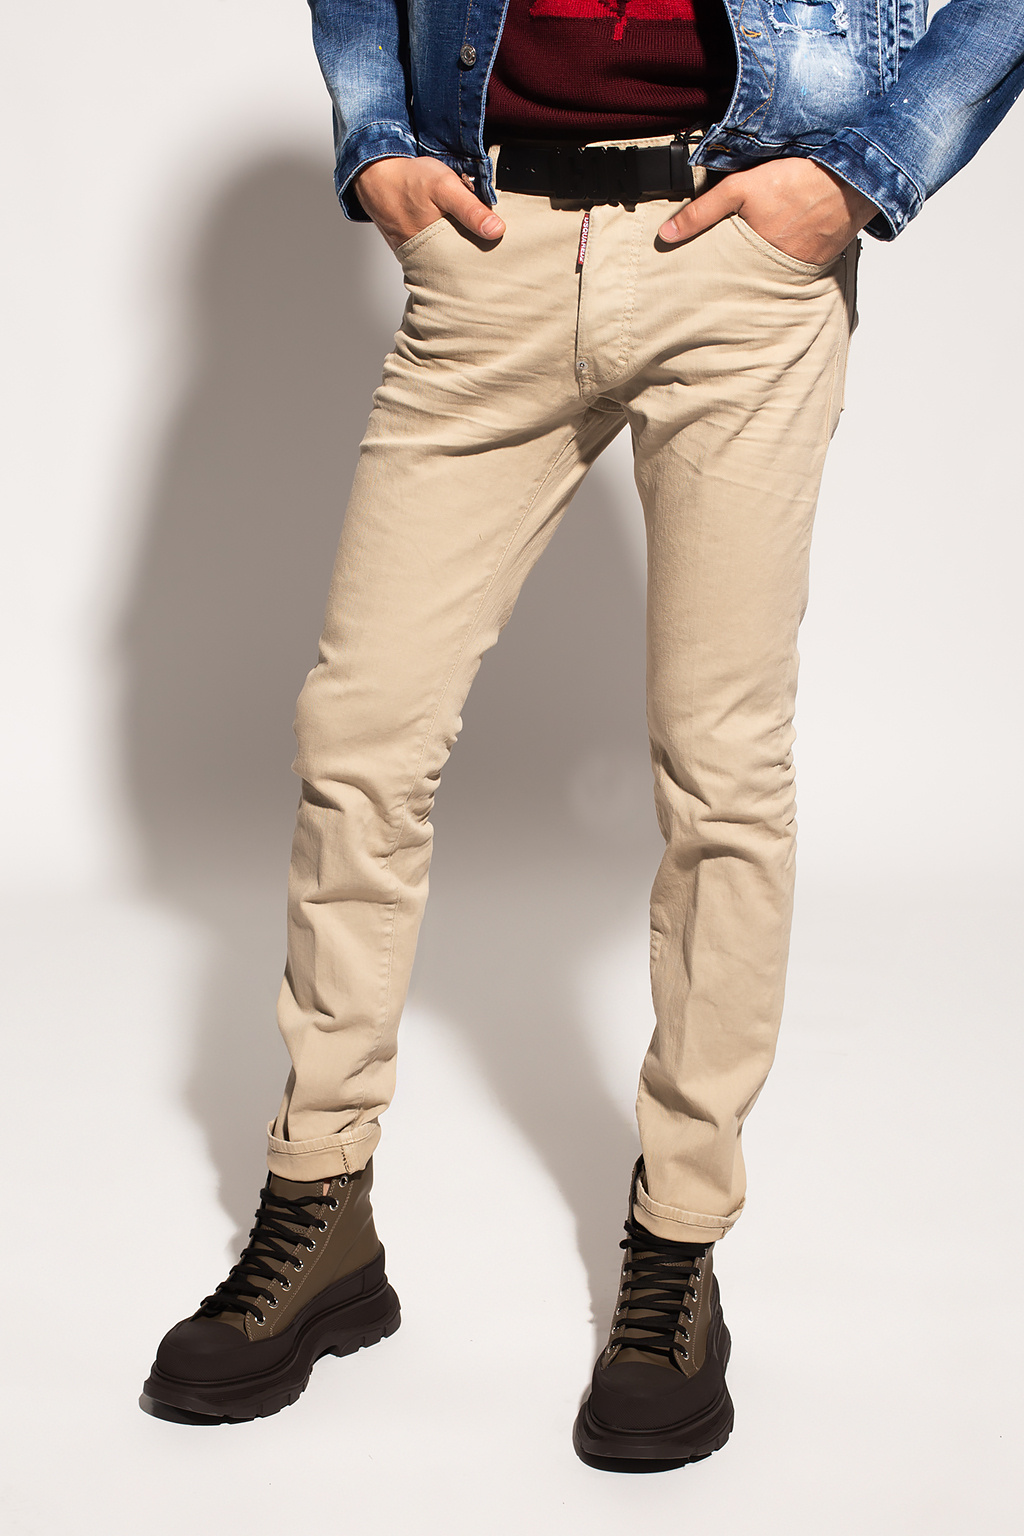 Dsquared2 'Cool Guy' jeans